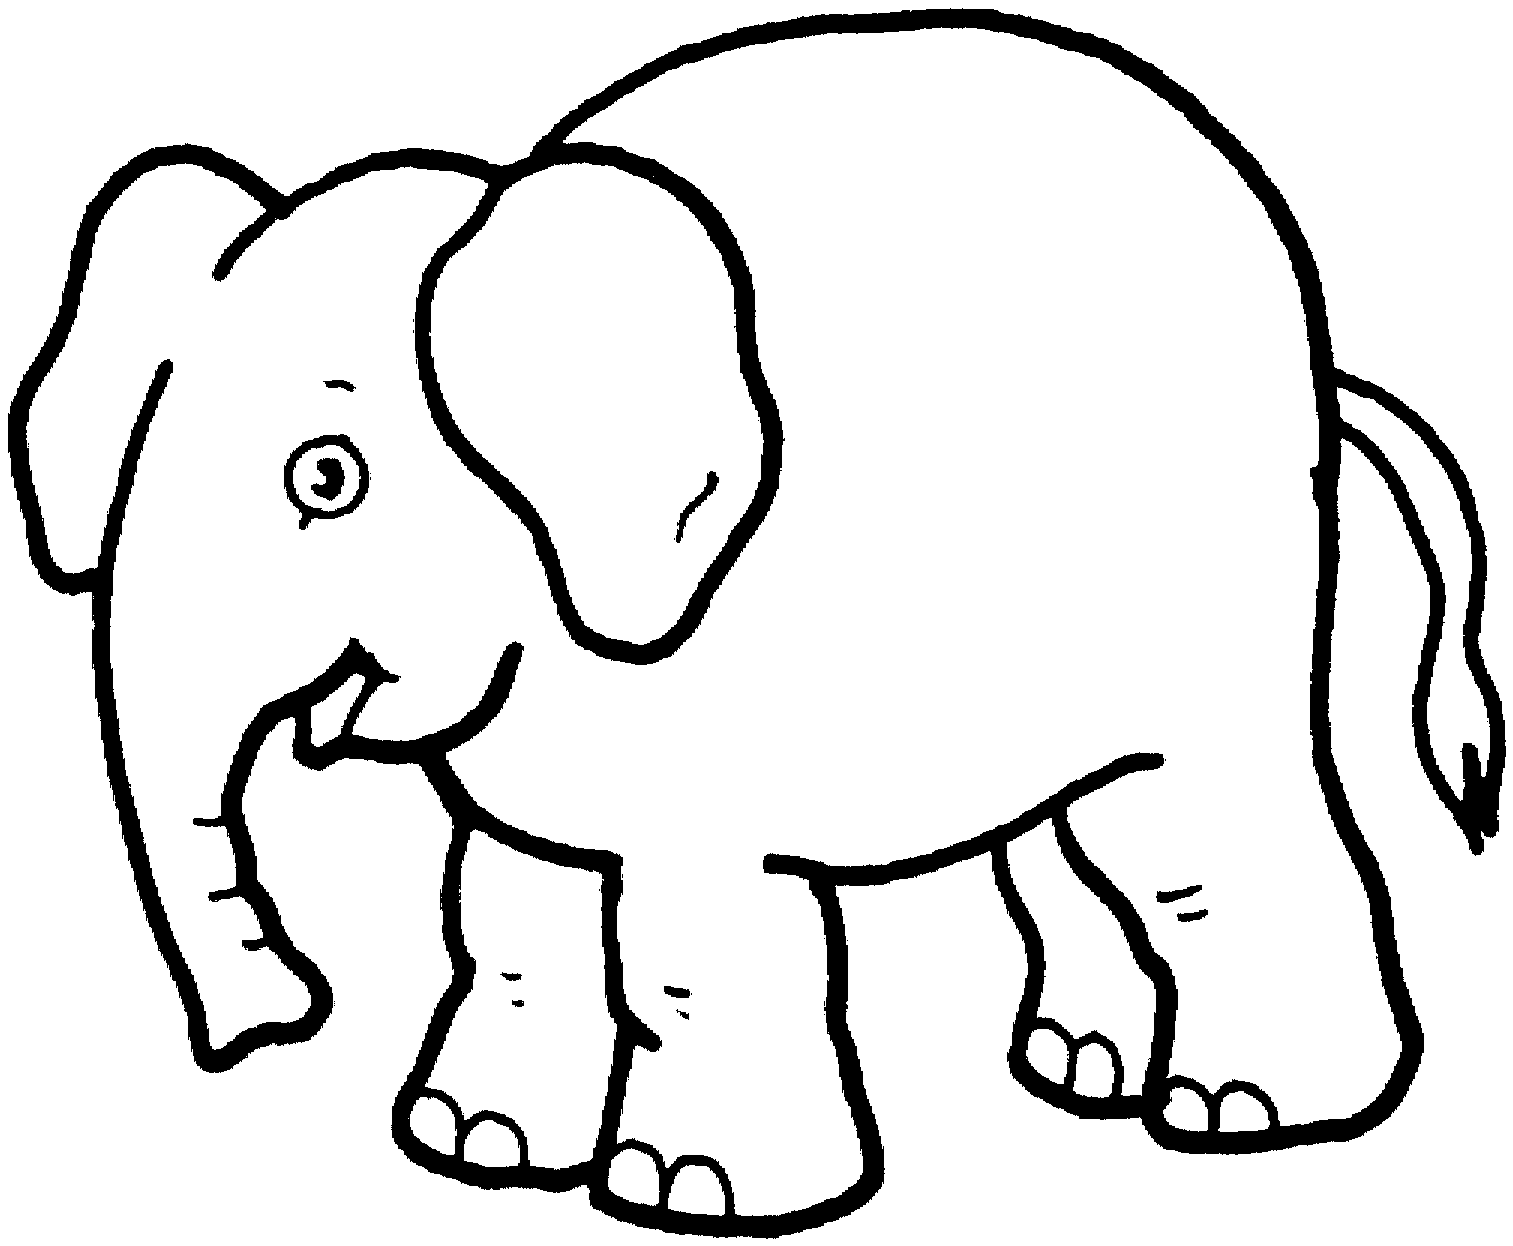 Drawing Of An Elephant - ClipArt Best